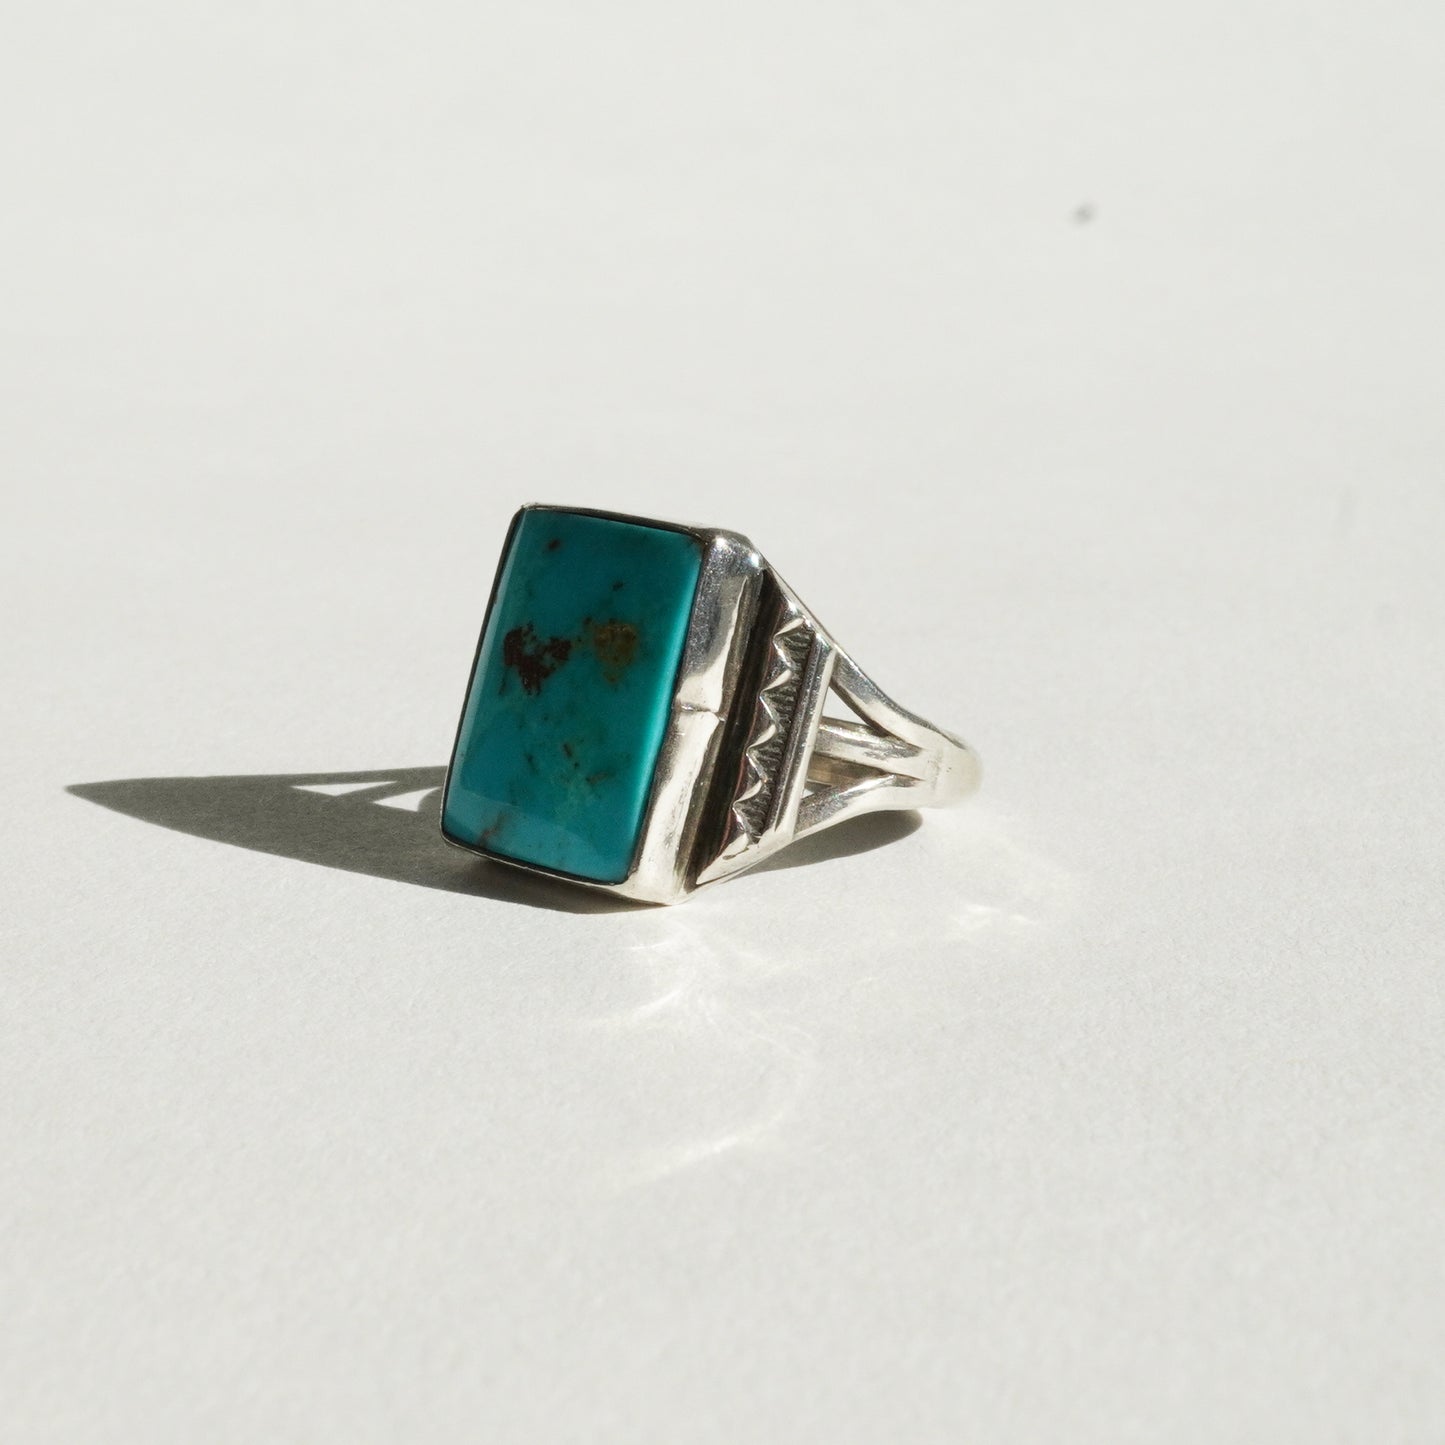 Vintage Square Cut Southwestern Turquoise Ring